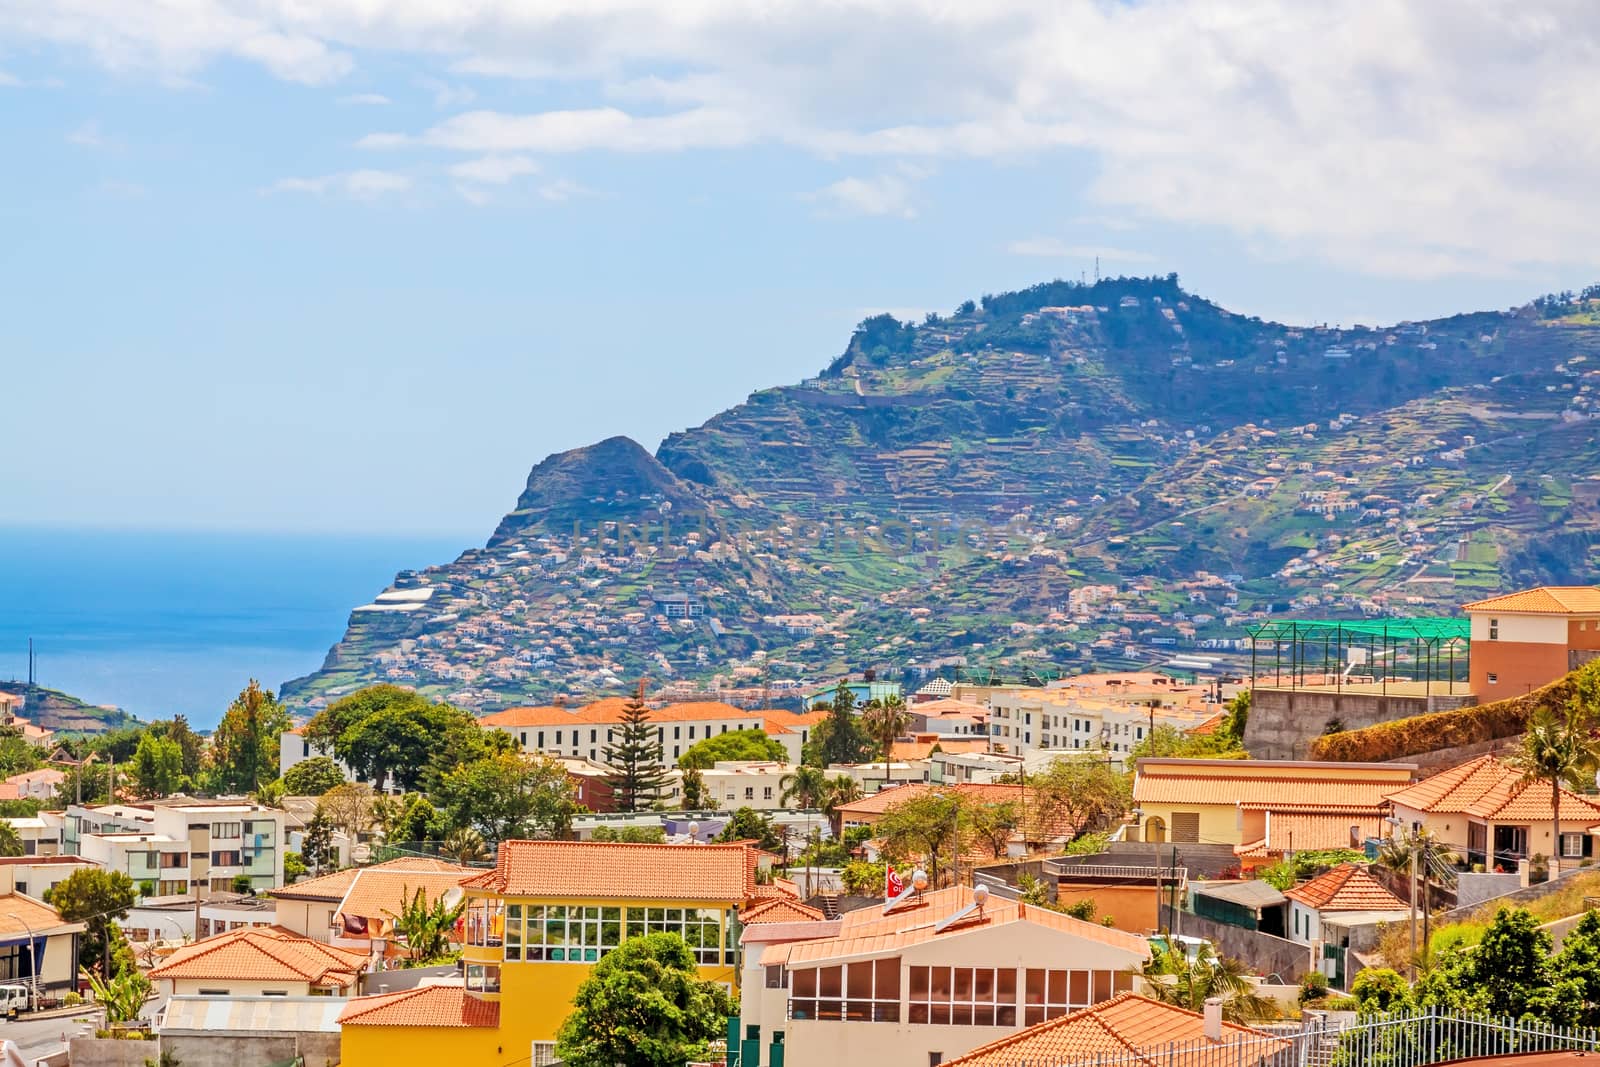 Funchal, Madeira - June 7, 2013: View over residential houses of Funchal, the capital city of Madeira - view from Pico dos Barcelo.